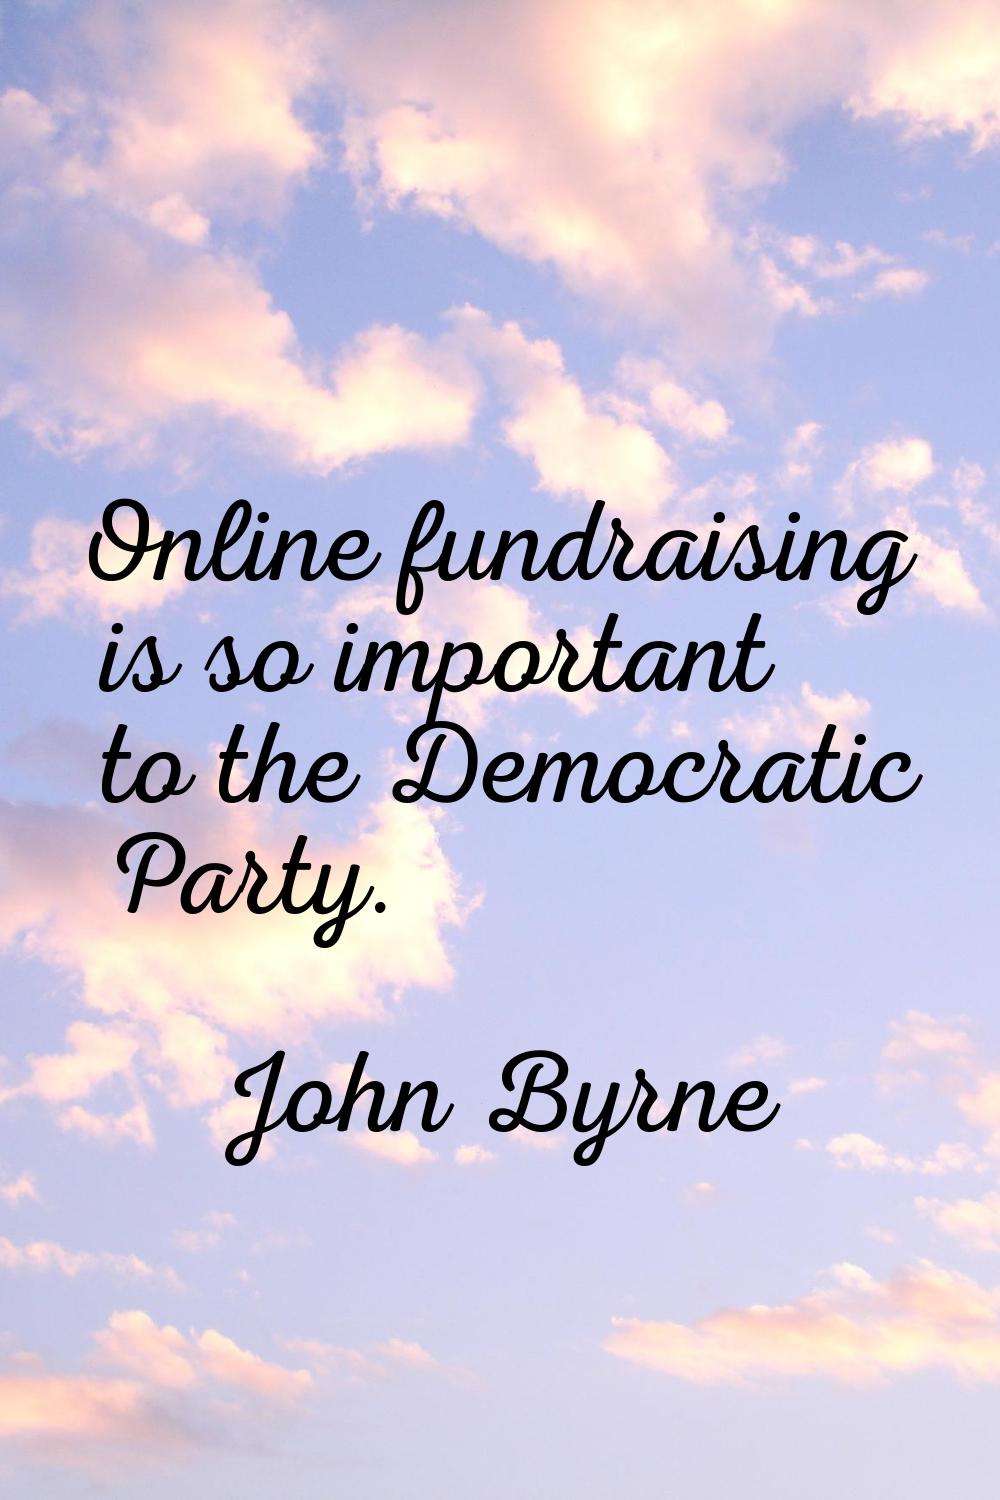 Online fundraising is so important to the Democratic Party.